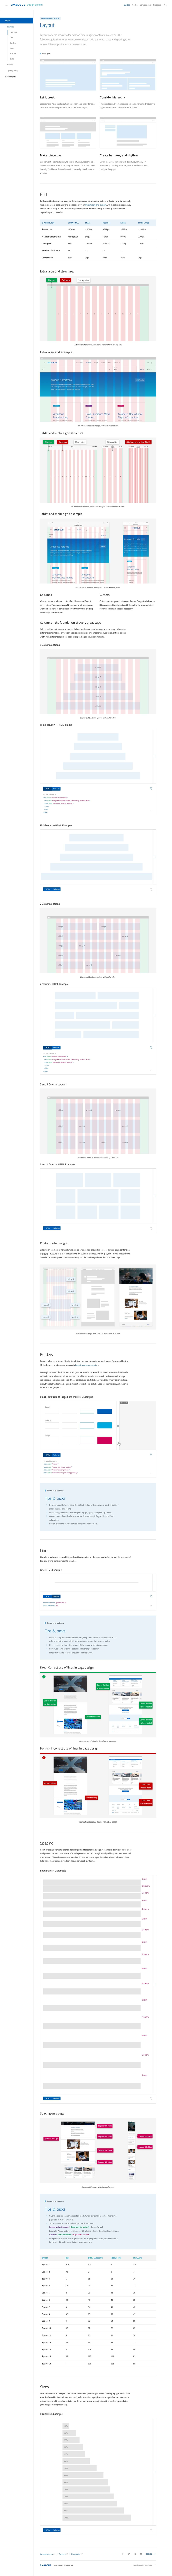 design-system-layout-page